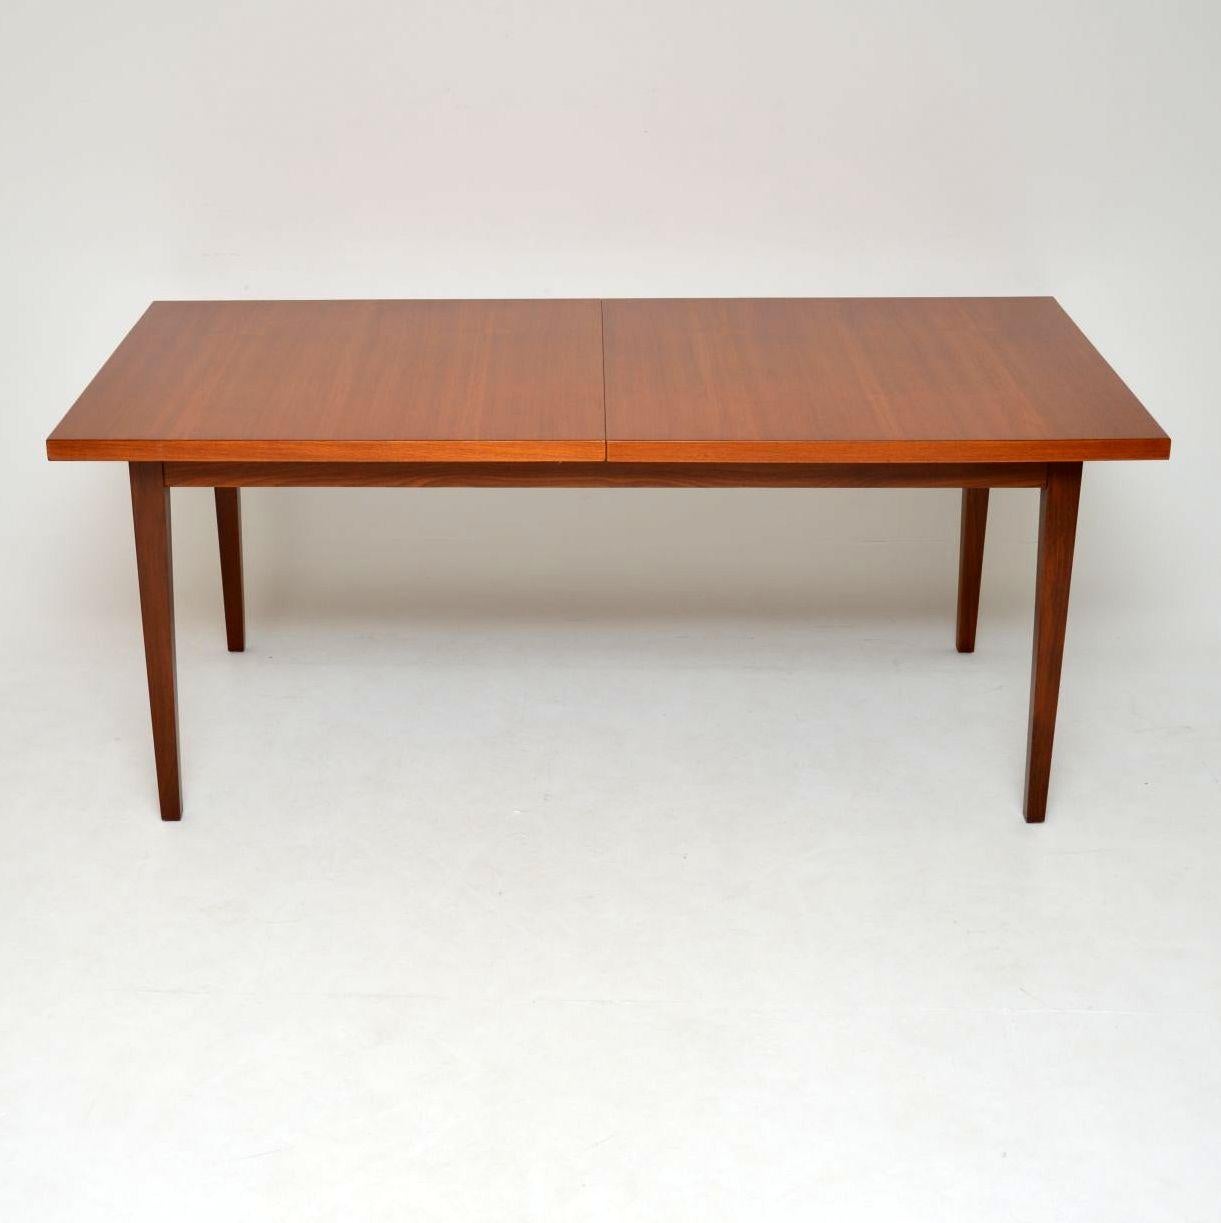 A beautiful and extremely well made vintage teak dining table from the 1960s. This was designed by Robert Heritage for part of the Dorrington dining range, manufactured by Archie Shine. It has a foldaway leaf that is built in and stores beneath the